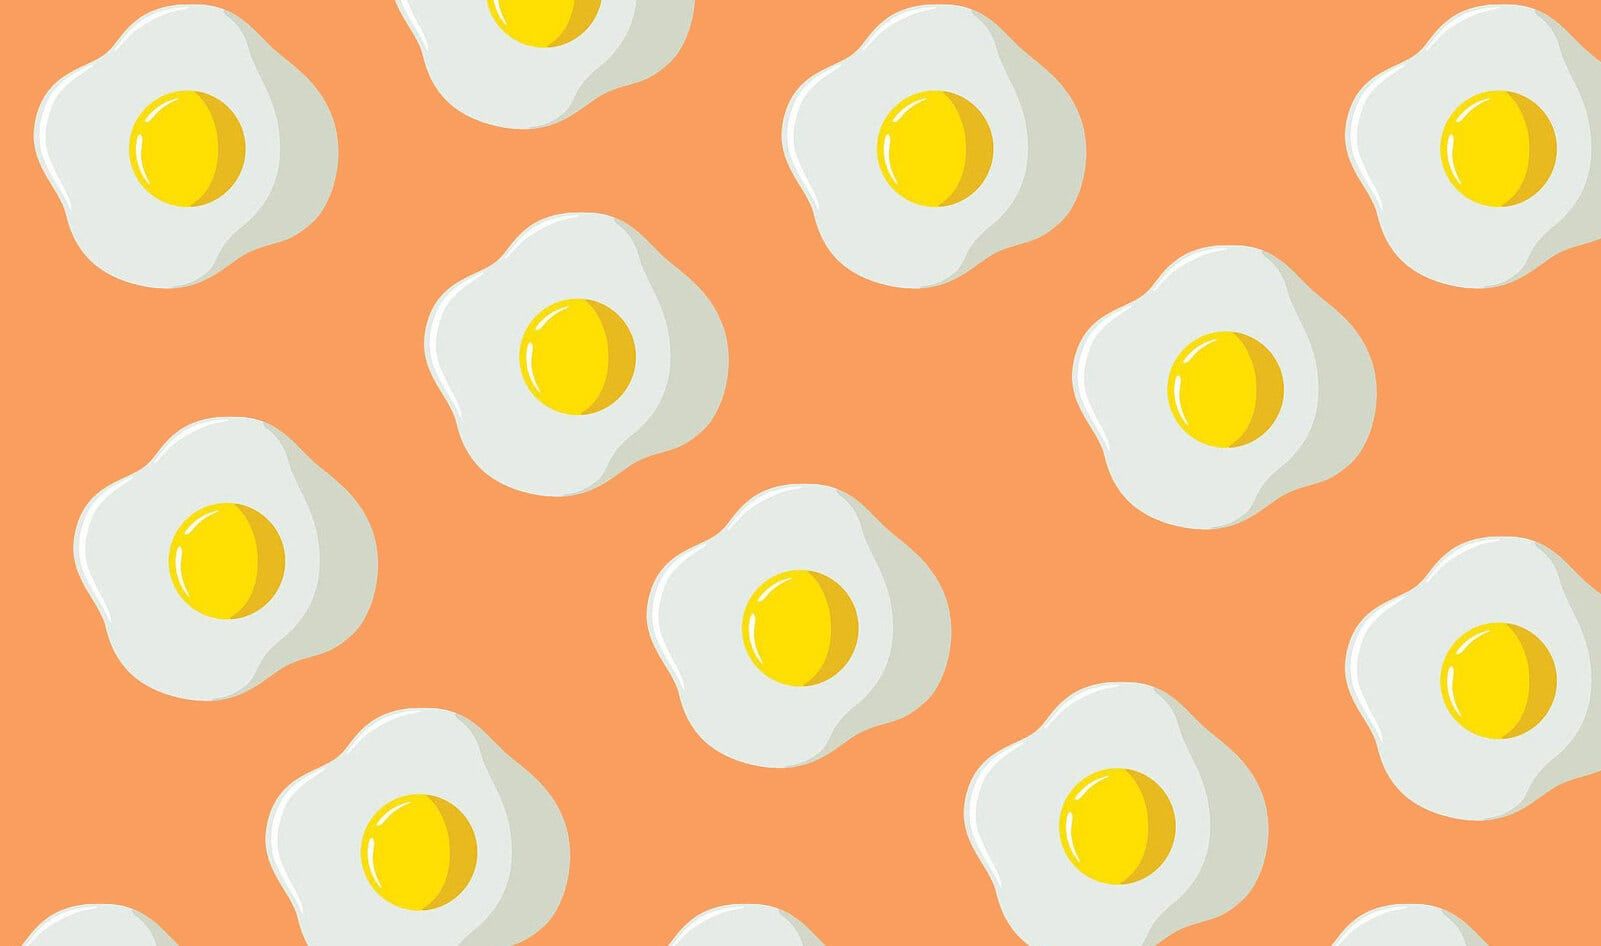 A pattern of eggs on an orange background - Egg